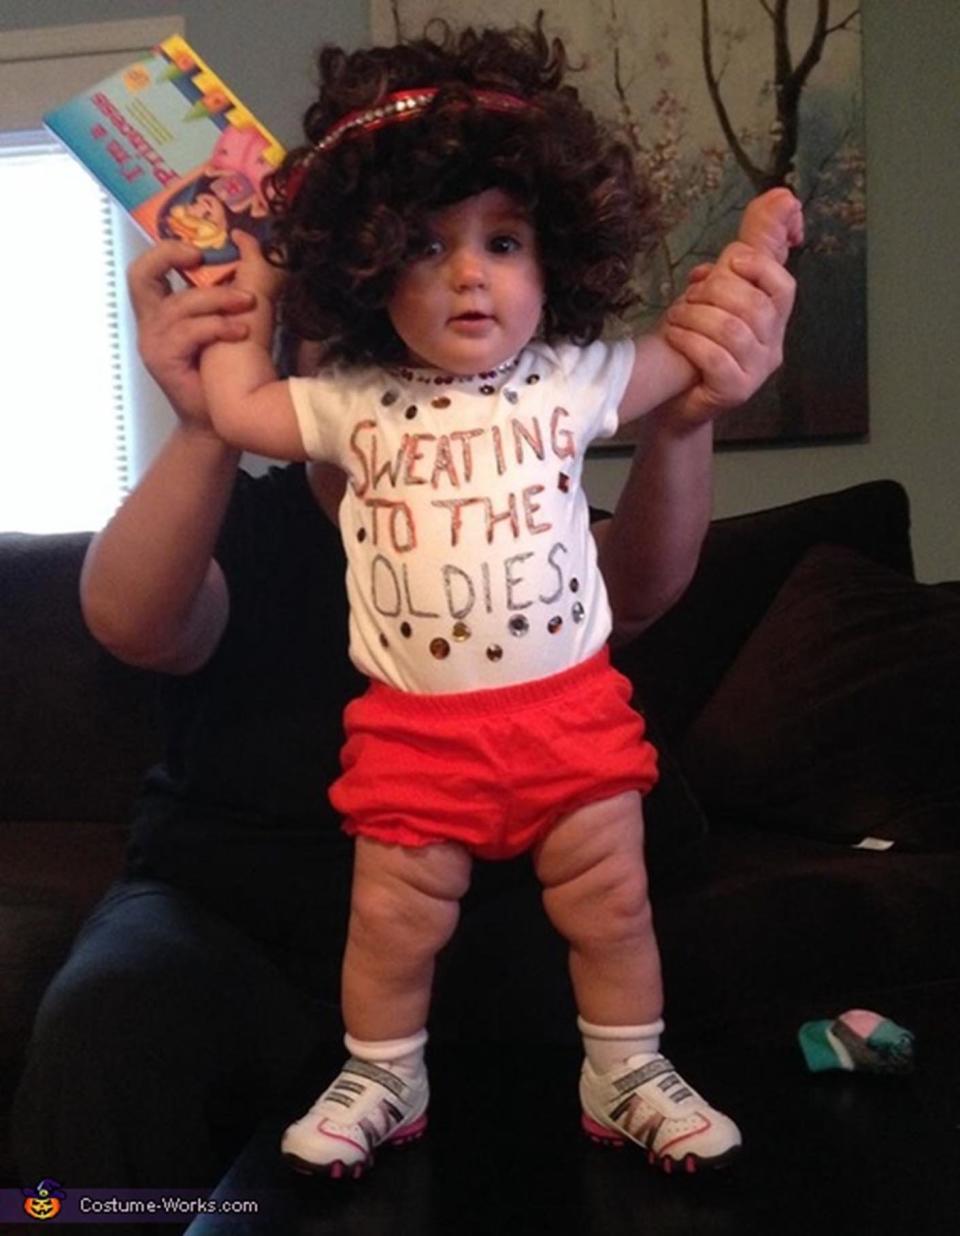 Via <a href="http://www.costume-works.com/costumes_for_babies/baby-richard-simmons.html" target="_blank">Costume Works</a>